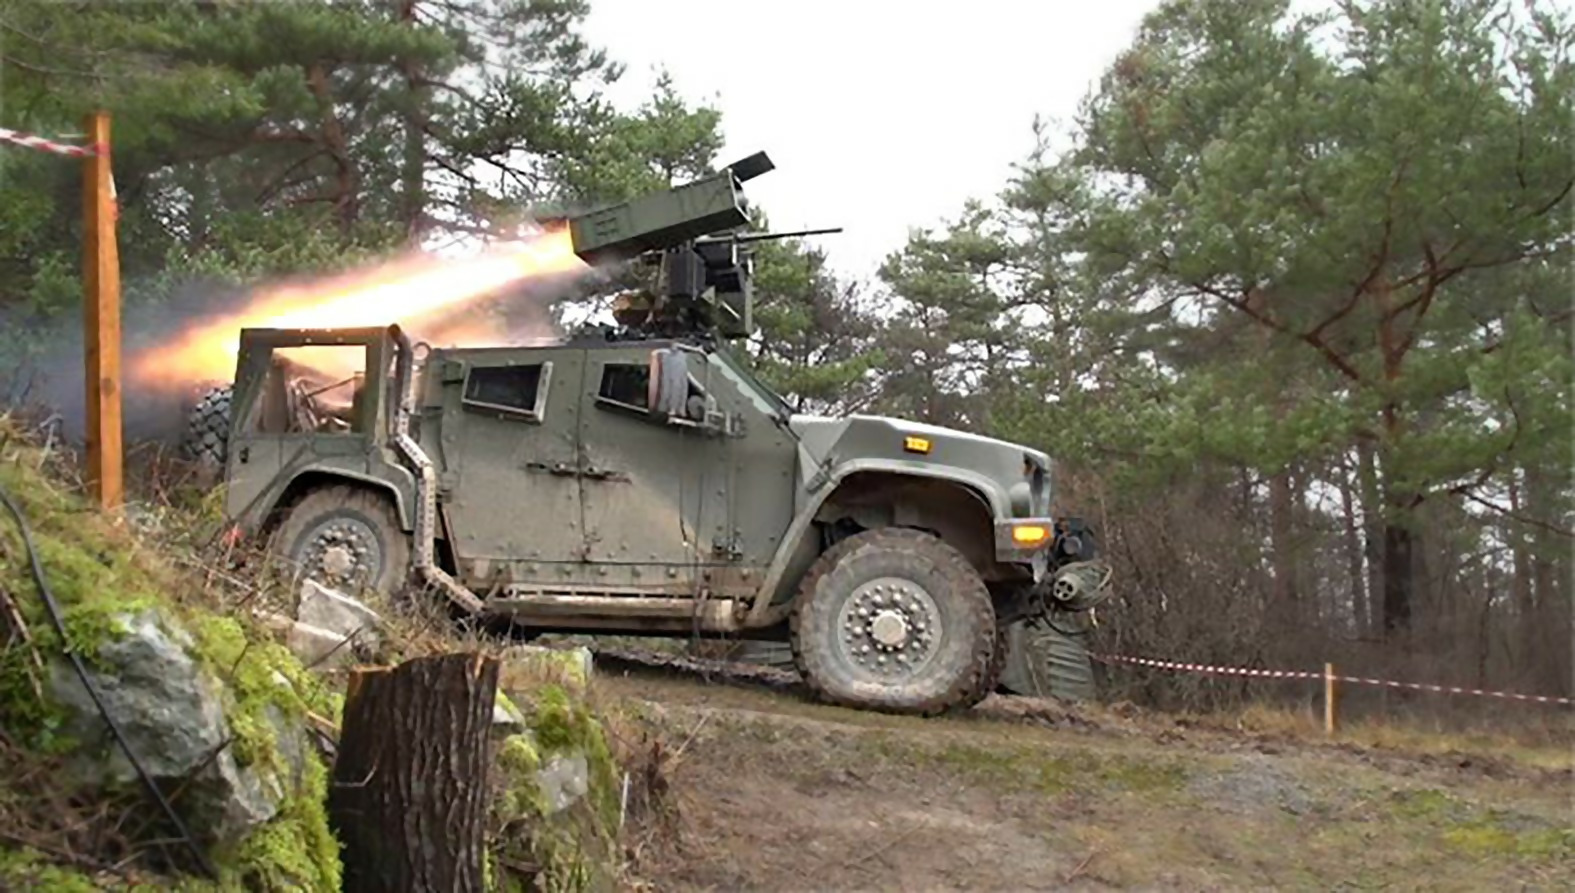 Rafael's SPIKE LR Missile Successfully Fired from Slovenian Armed Forces Oshkosh JLTV